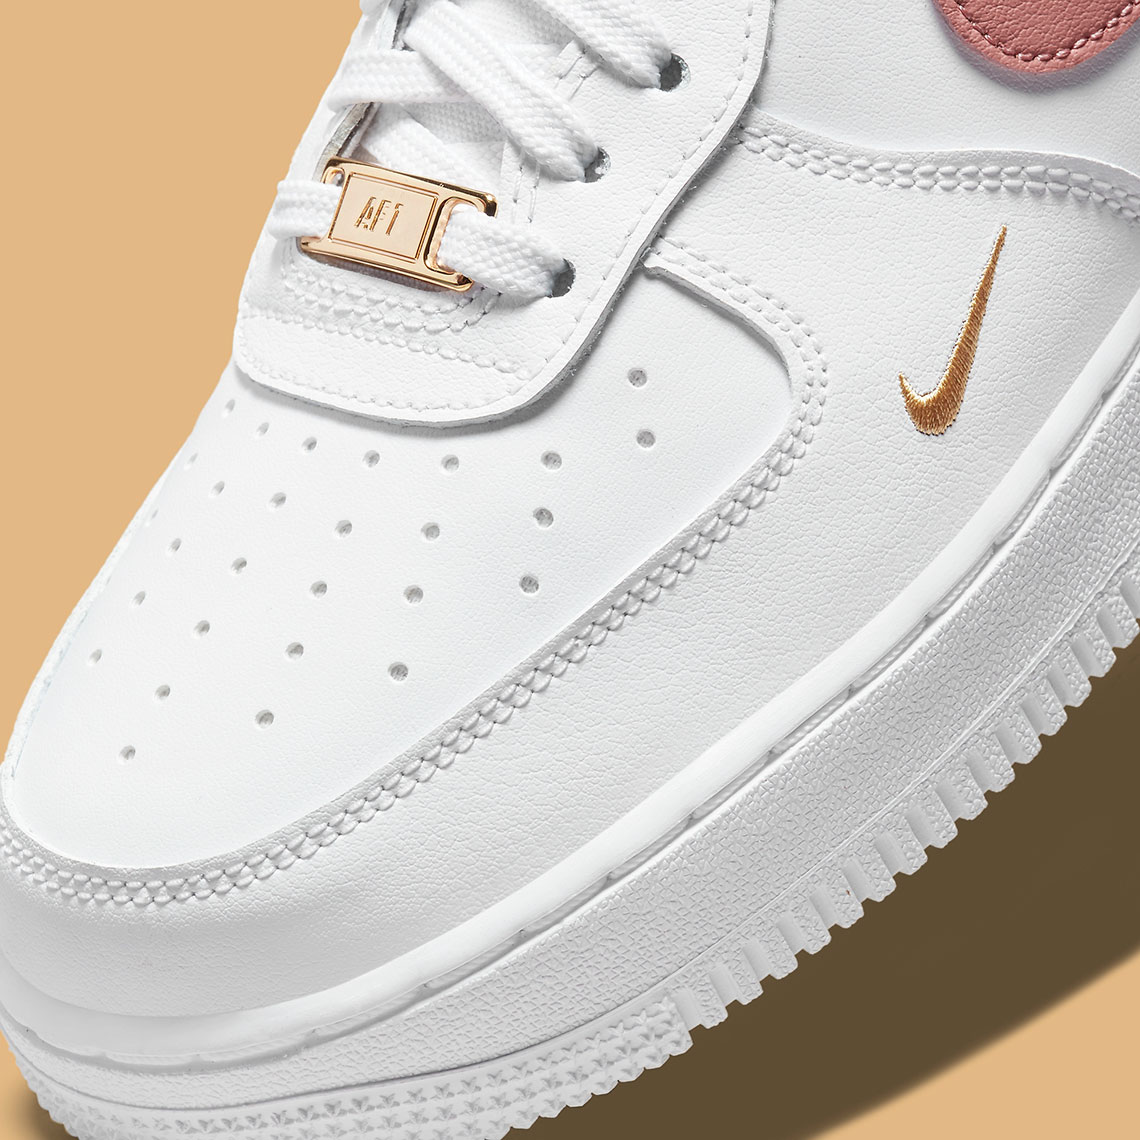 Nike Air Force 1 White Rust Pink White Rust Pink Cz0270 103 1